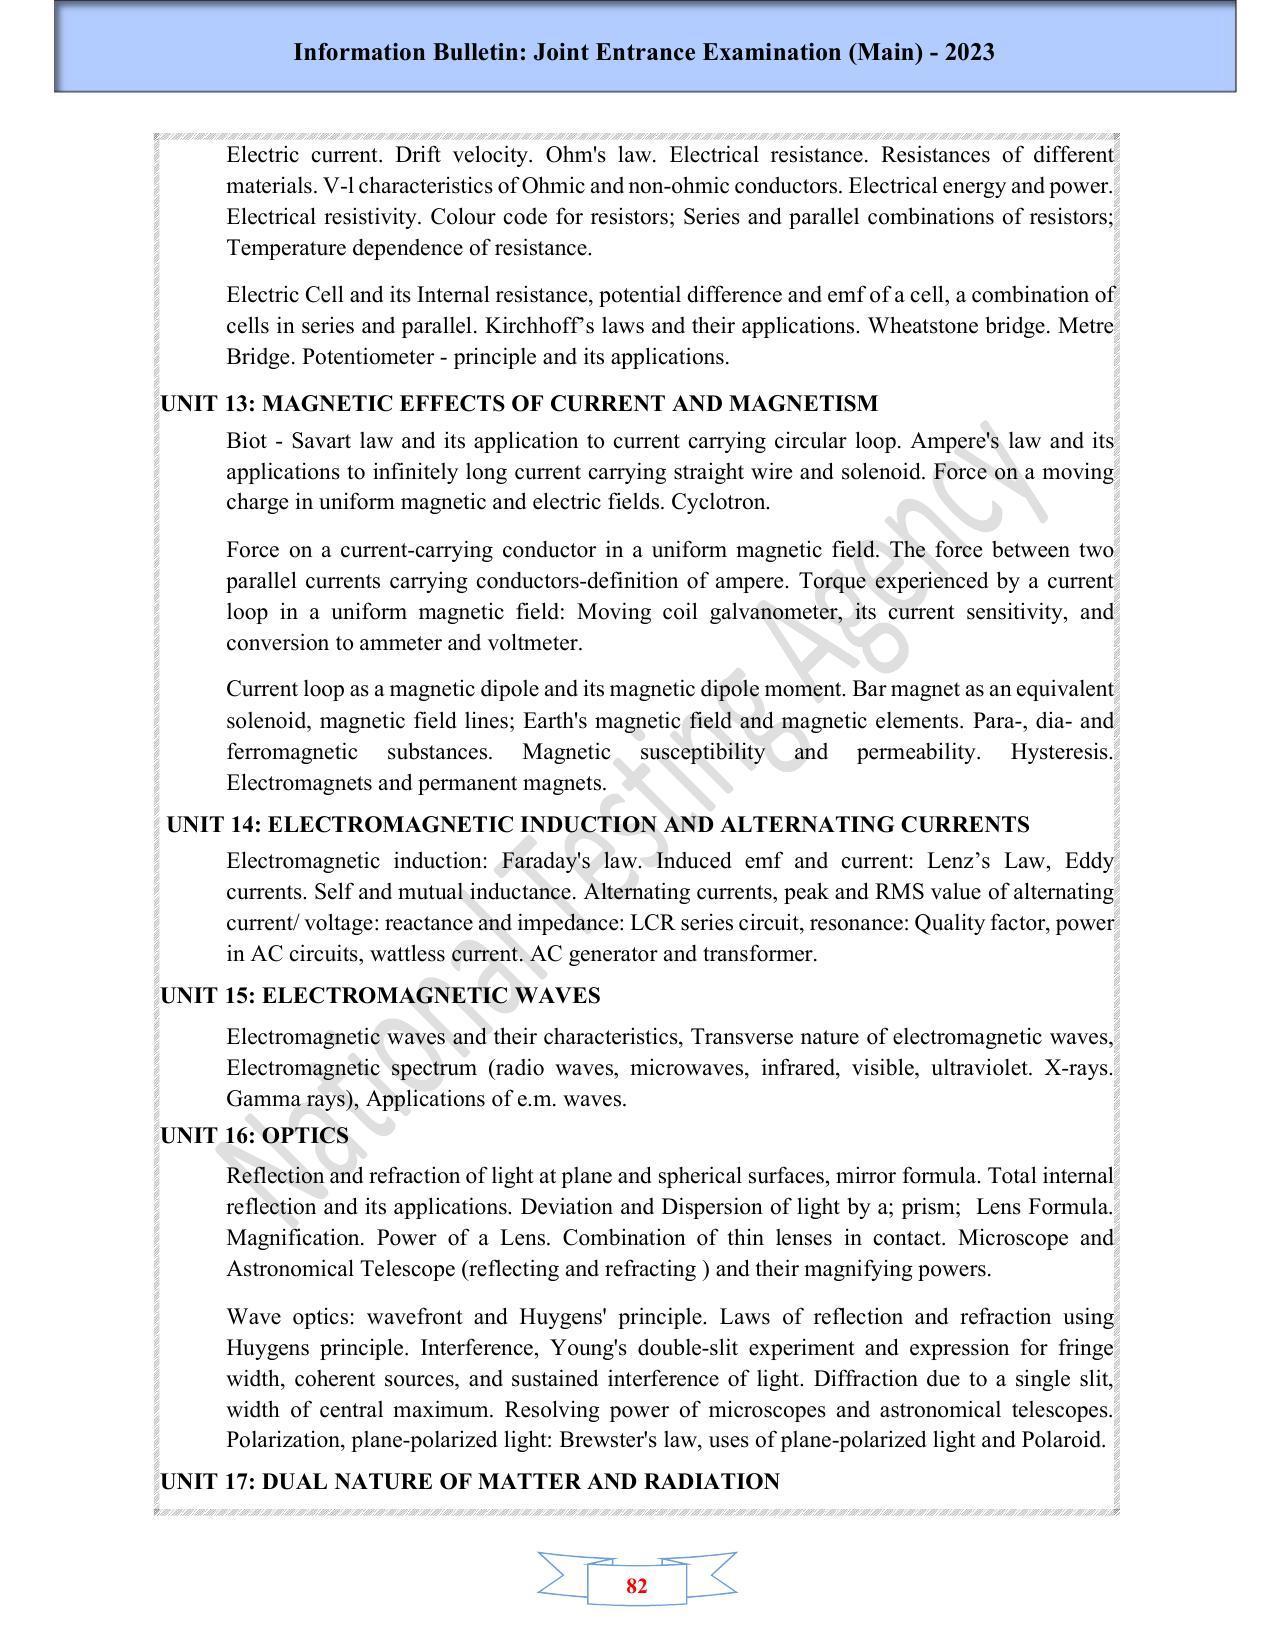 JEE Main 2023 Session 2 - Page 84